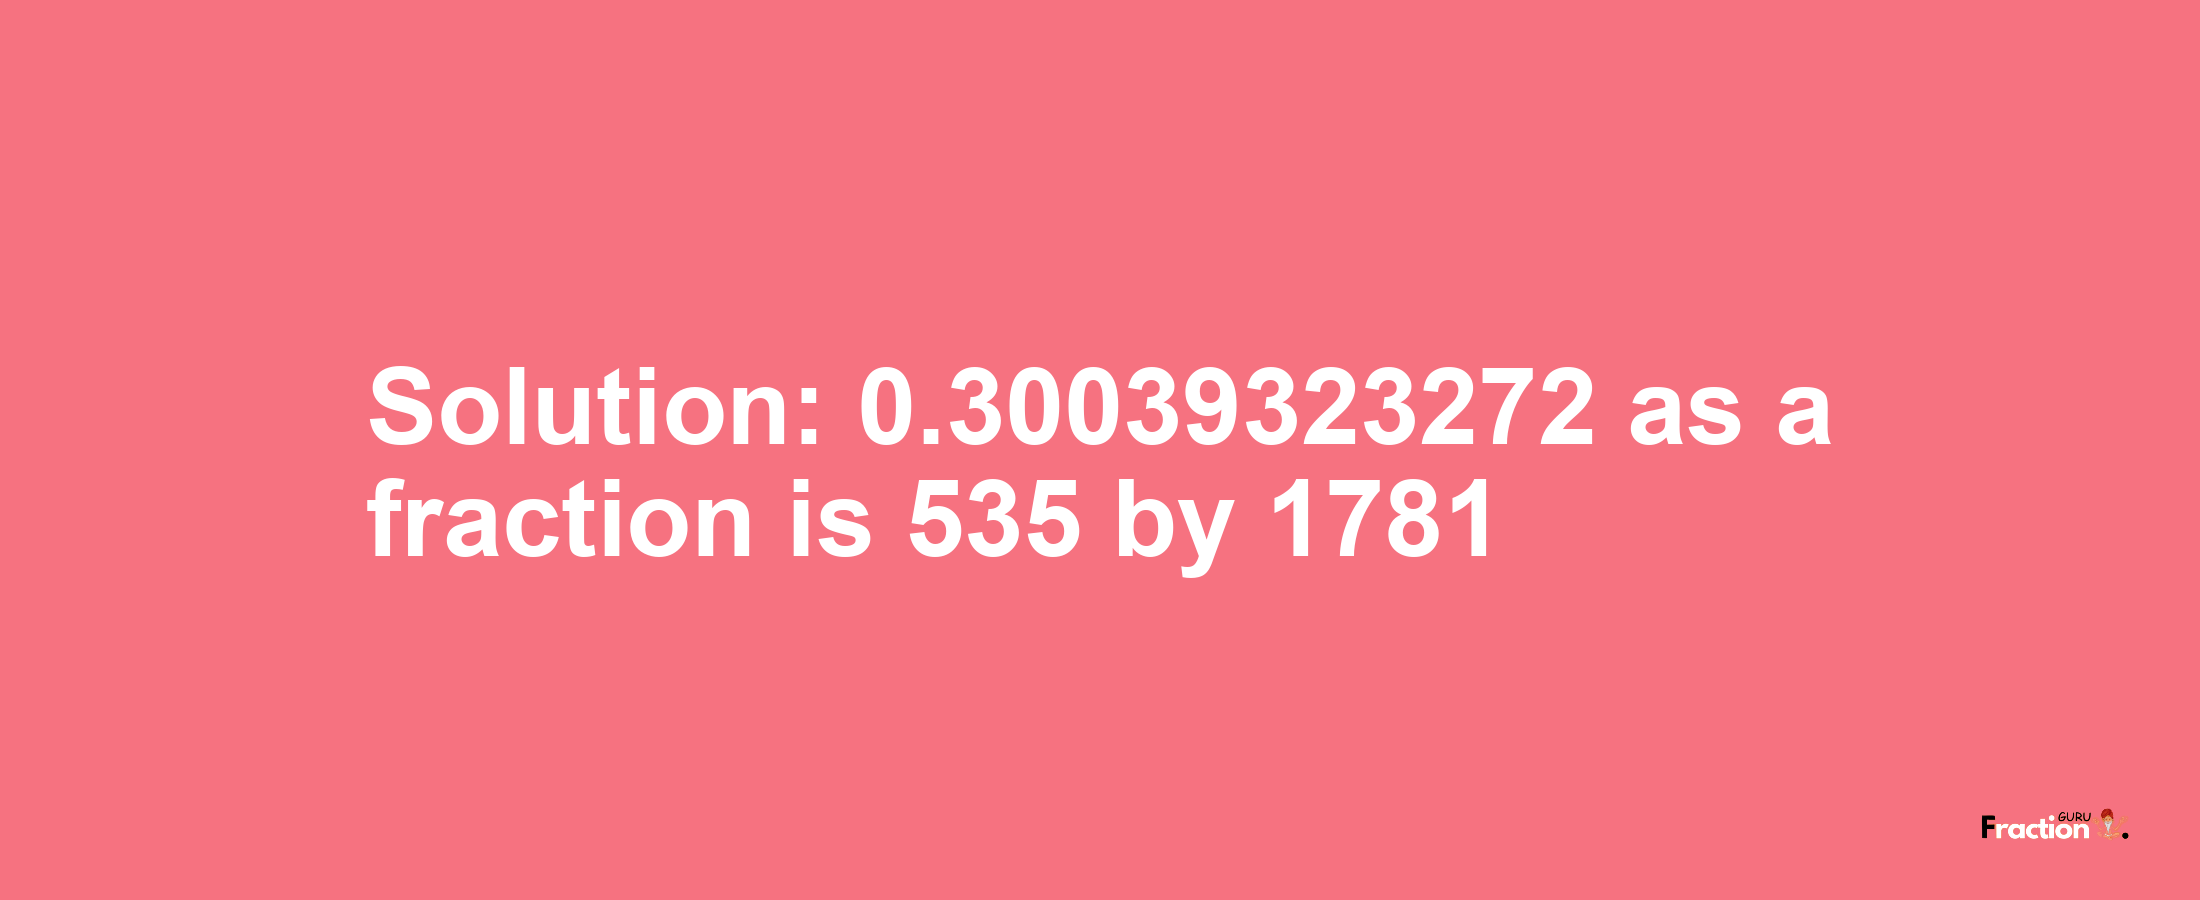 Solution:0.30039323272 as a fraction is 535/1781